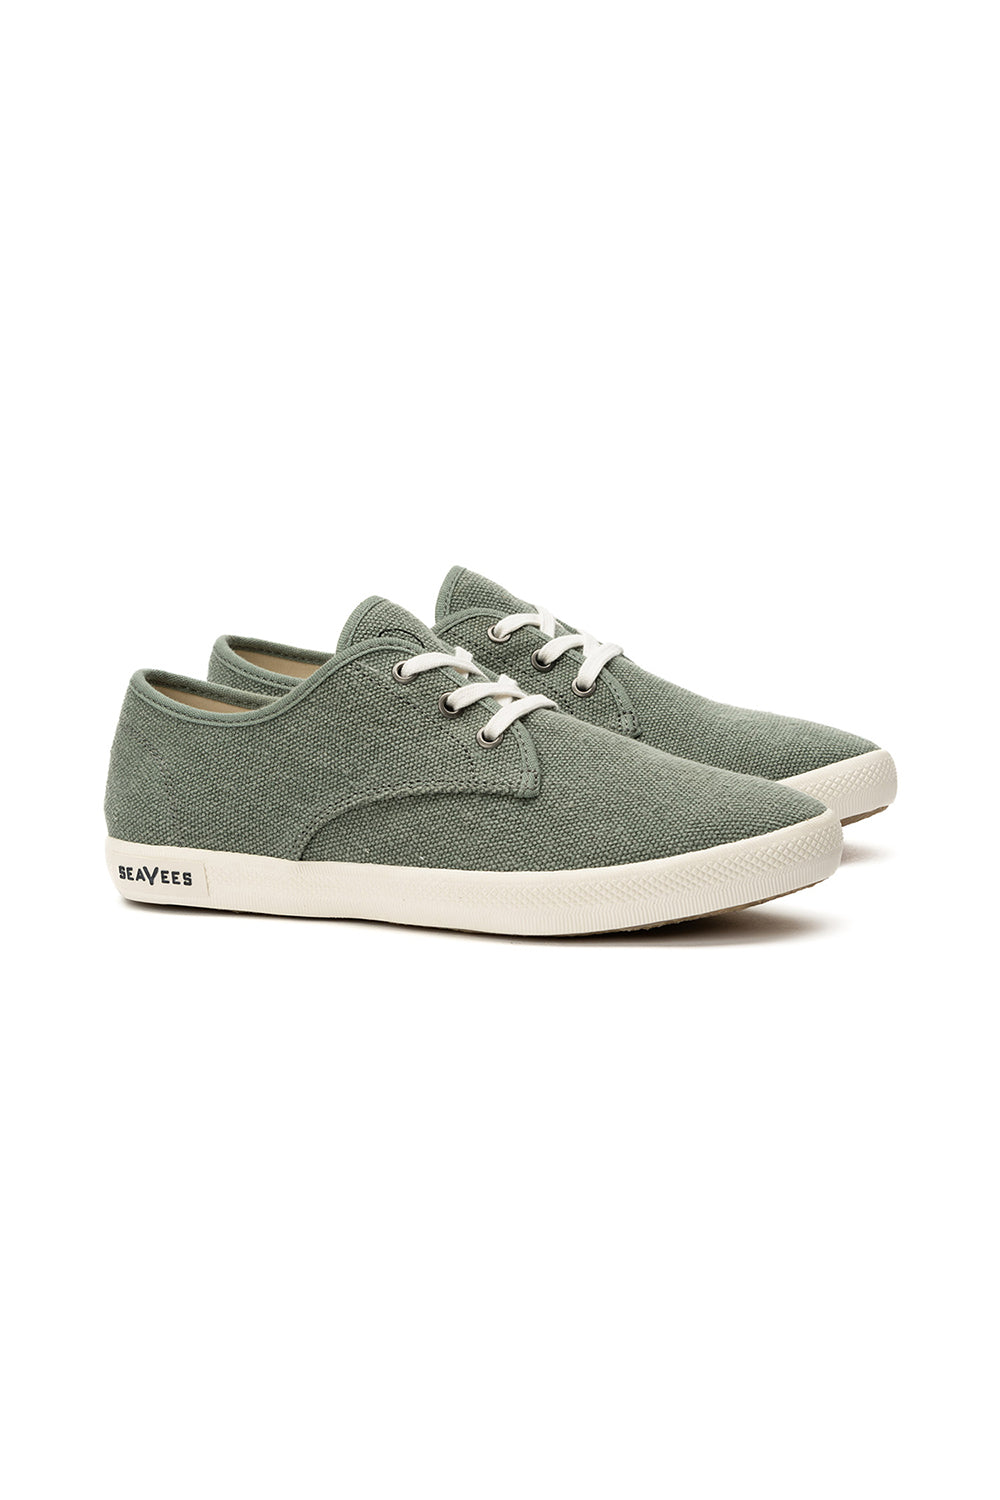 Women's Sixty-Six- SeaVees | Jungmaven Hemp Clothing & Accessories / Color: Clay Green